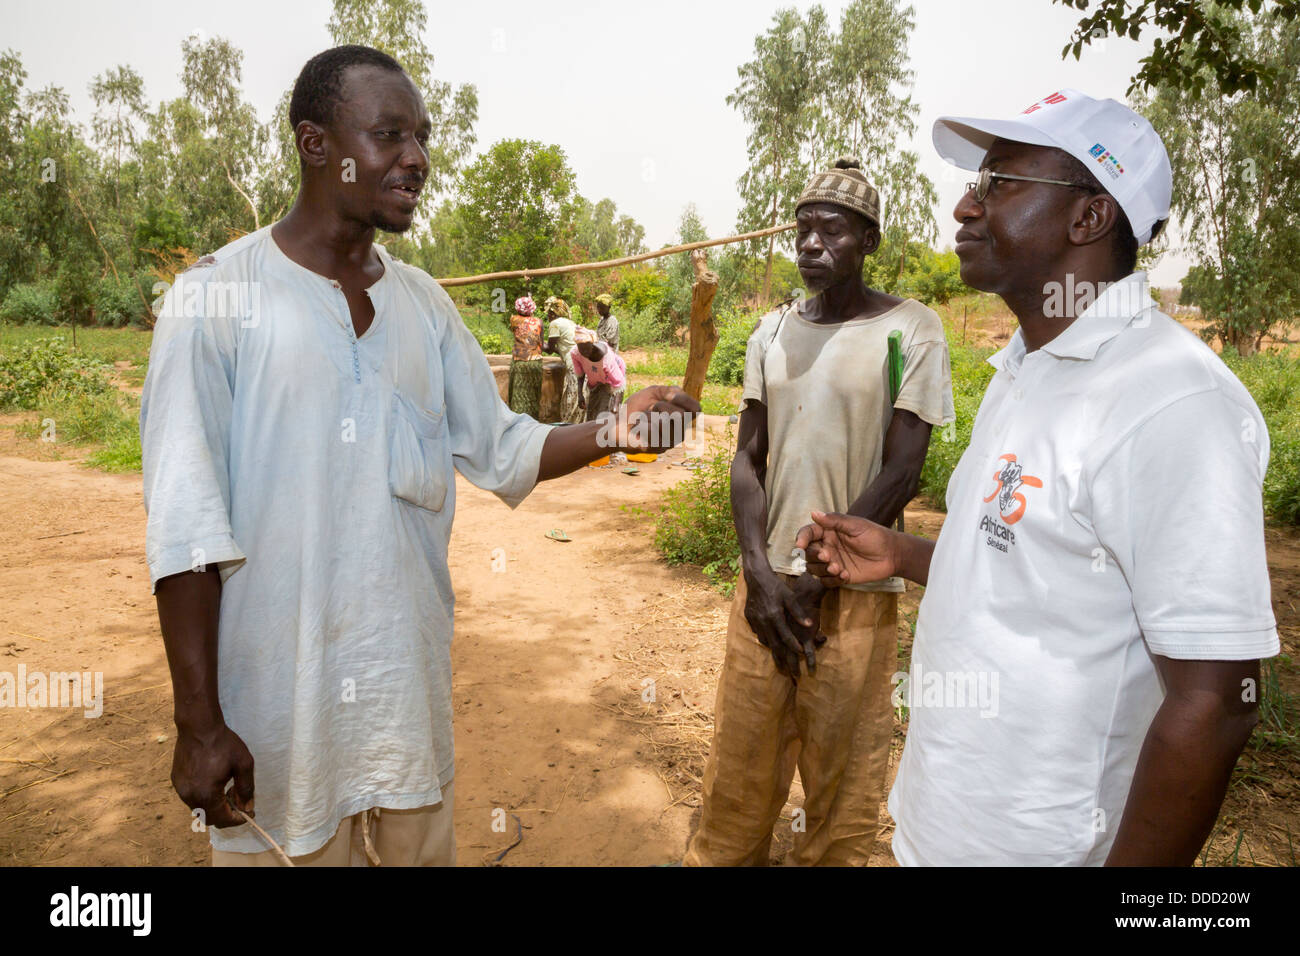 Africare Chef d'Antenne Talking to Participants in Dialacouna Gardening Project, near Kaolack, Senegal. An Africare Project. Stock Photo